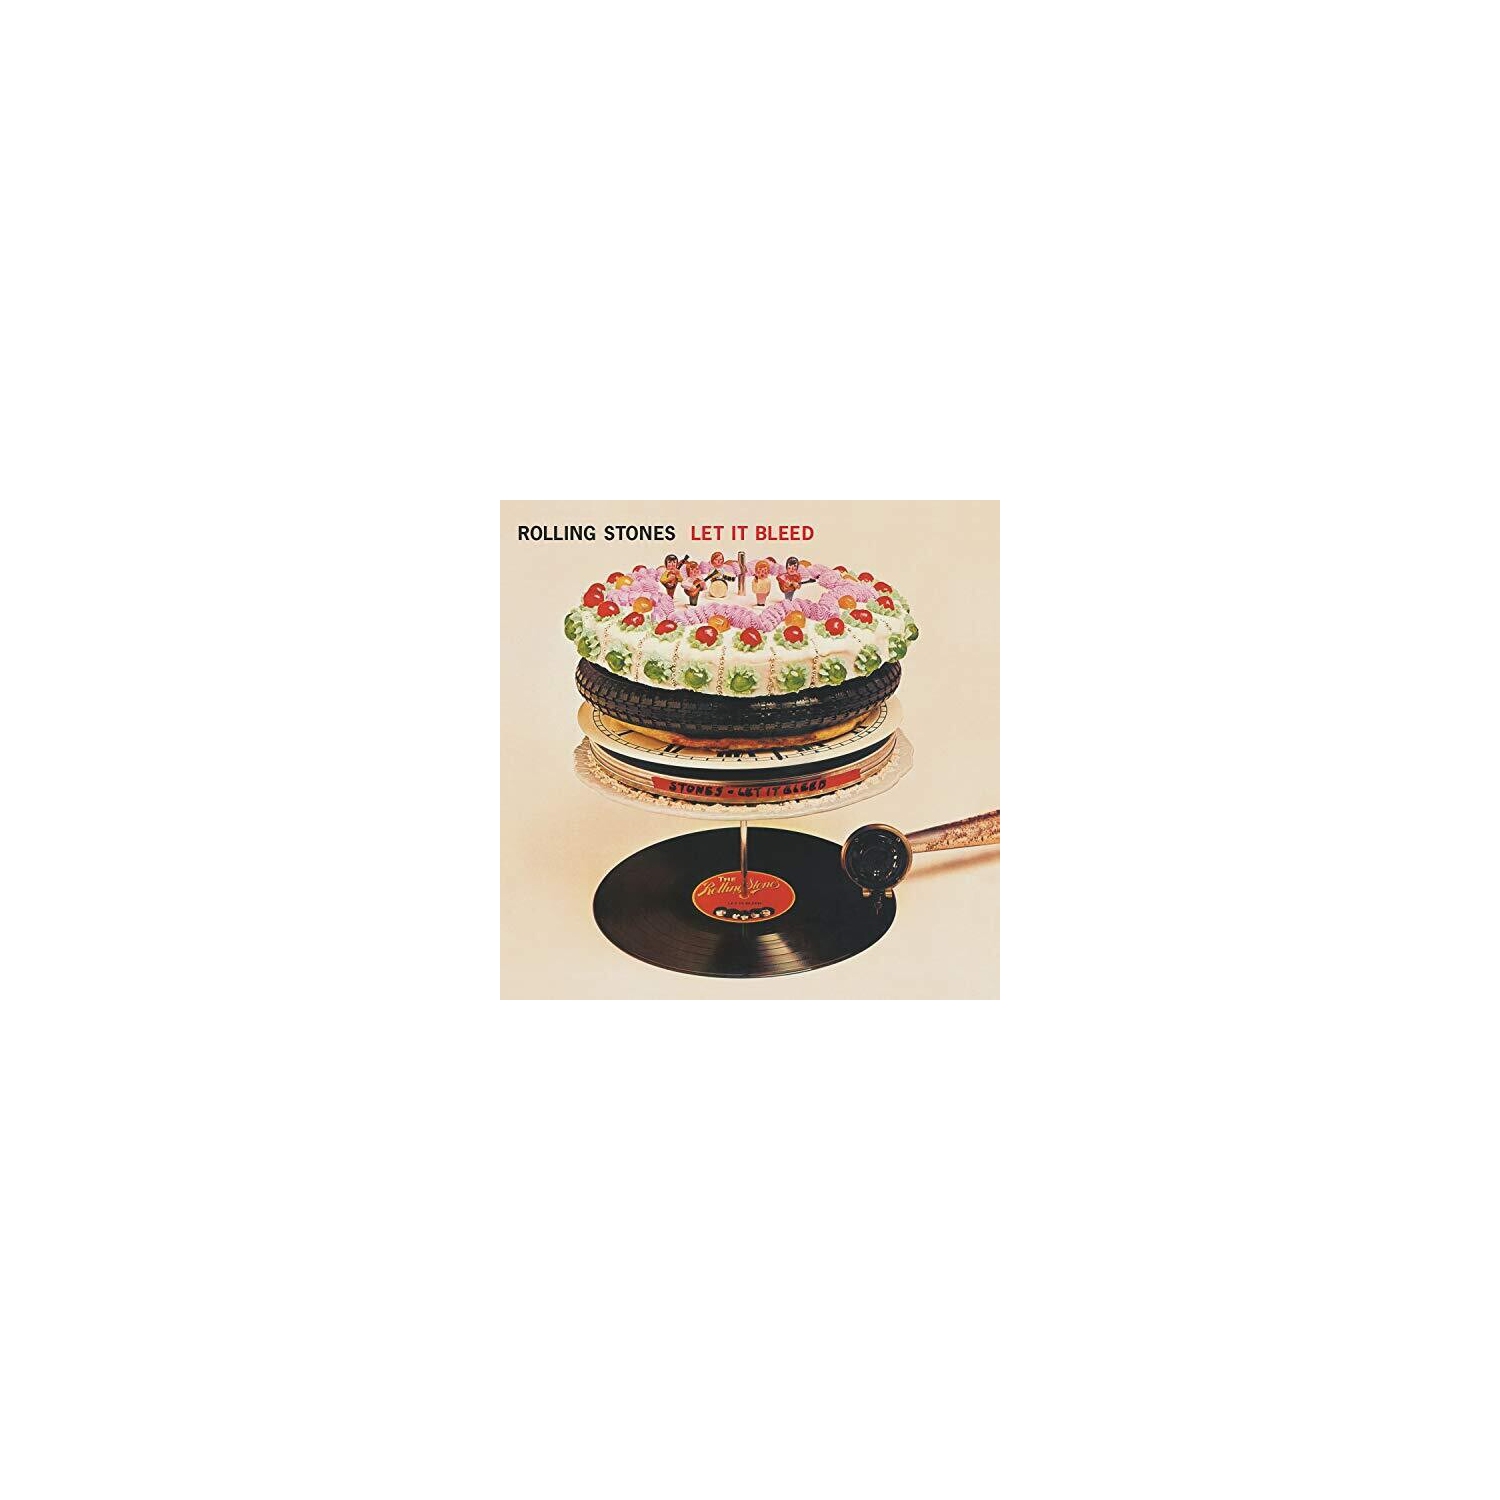 LET IT BLEED (50TH ANNIVERSARY LP EDITION) - THE ROLLING STONES [LP]